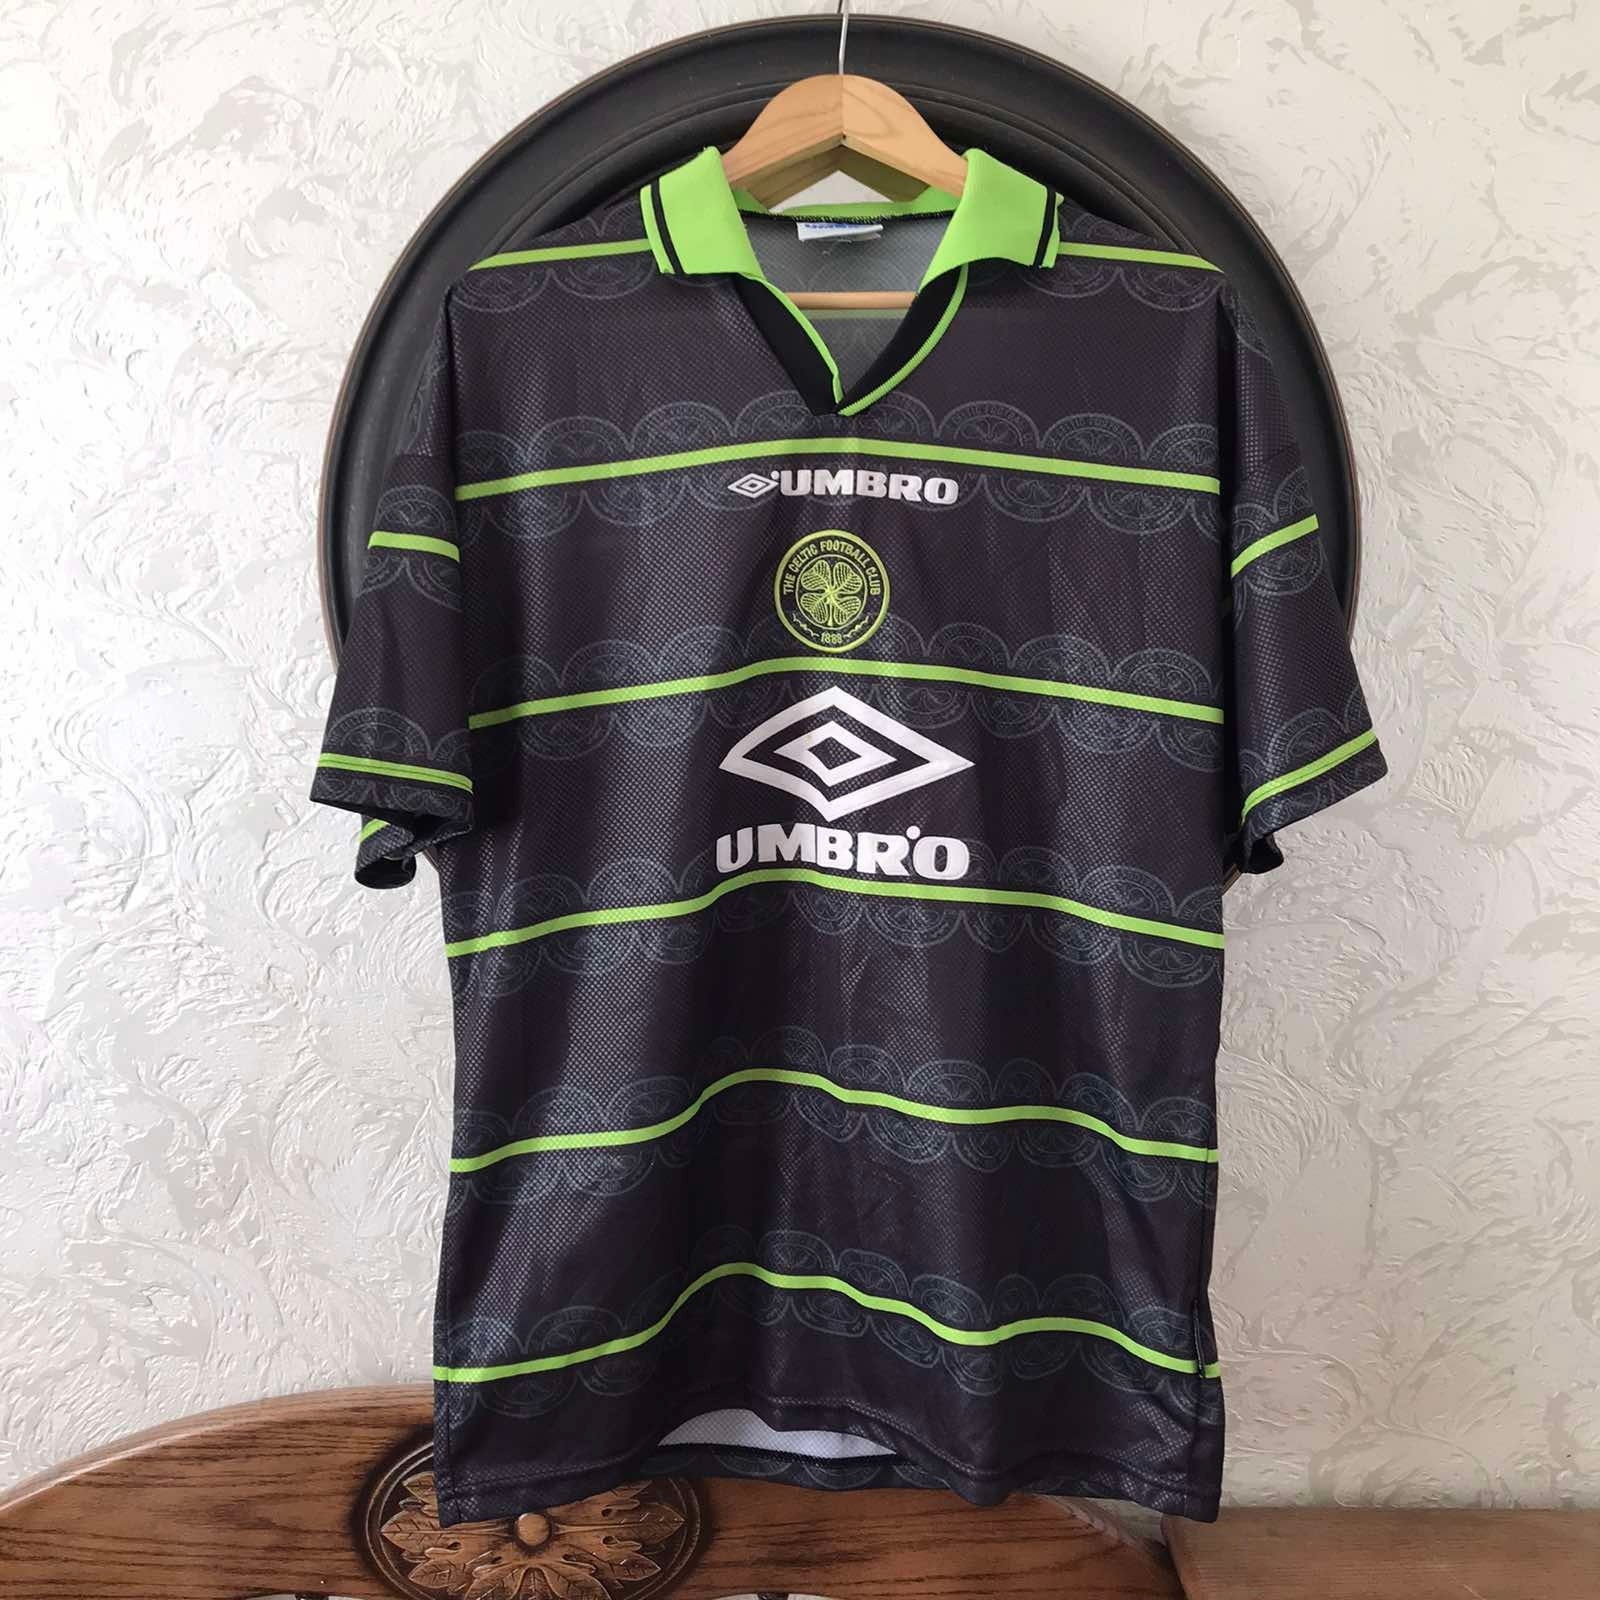 Fantasy Kit Friday – Celtic and Manchester United Tailored by Umbro –